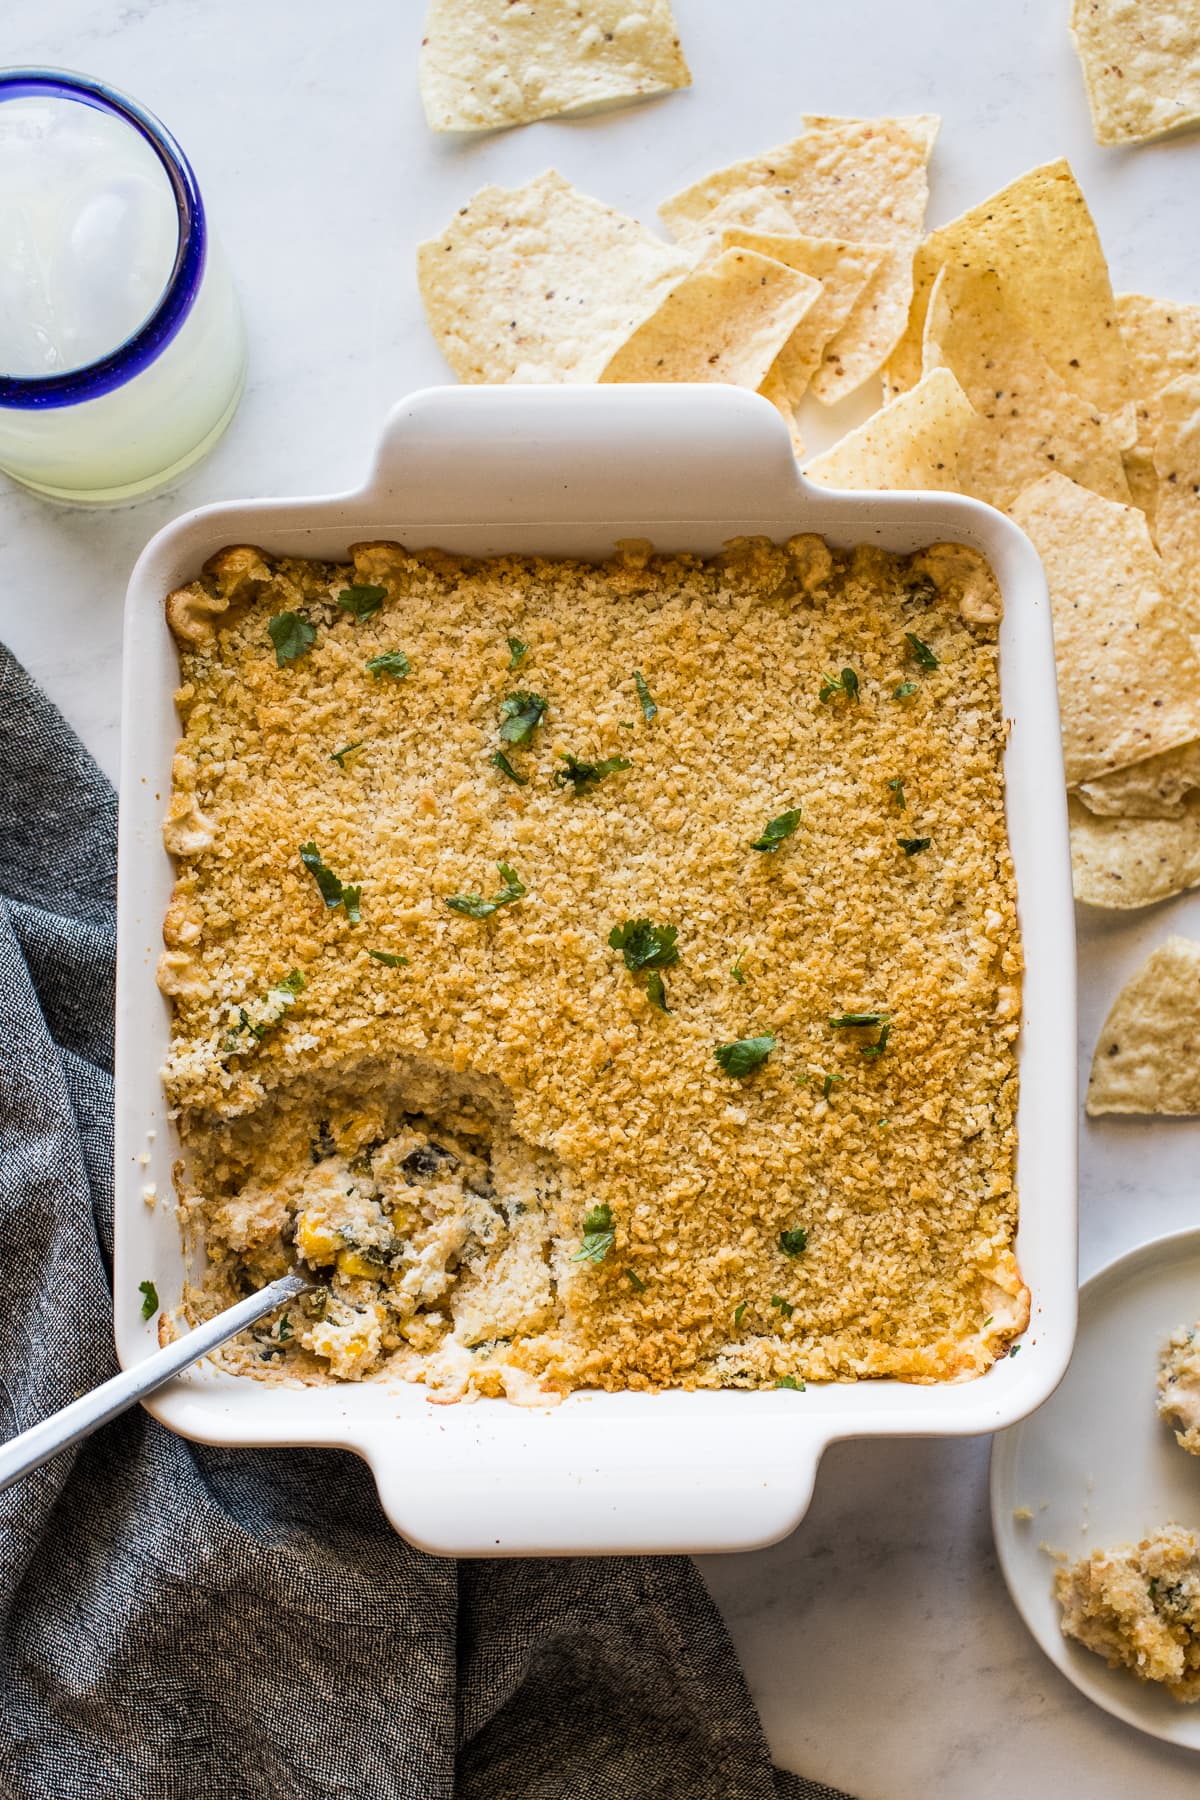 Chile relleno dip in a baking dish surrounded by tortilla chips.